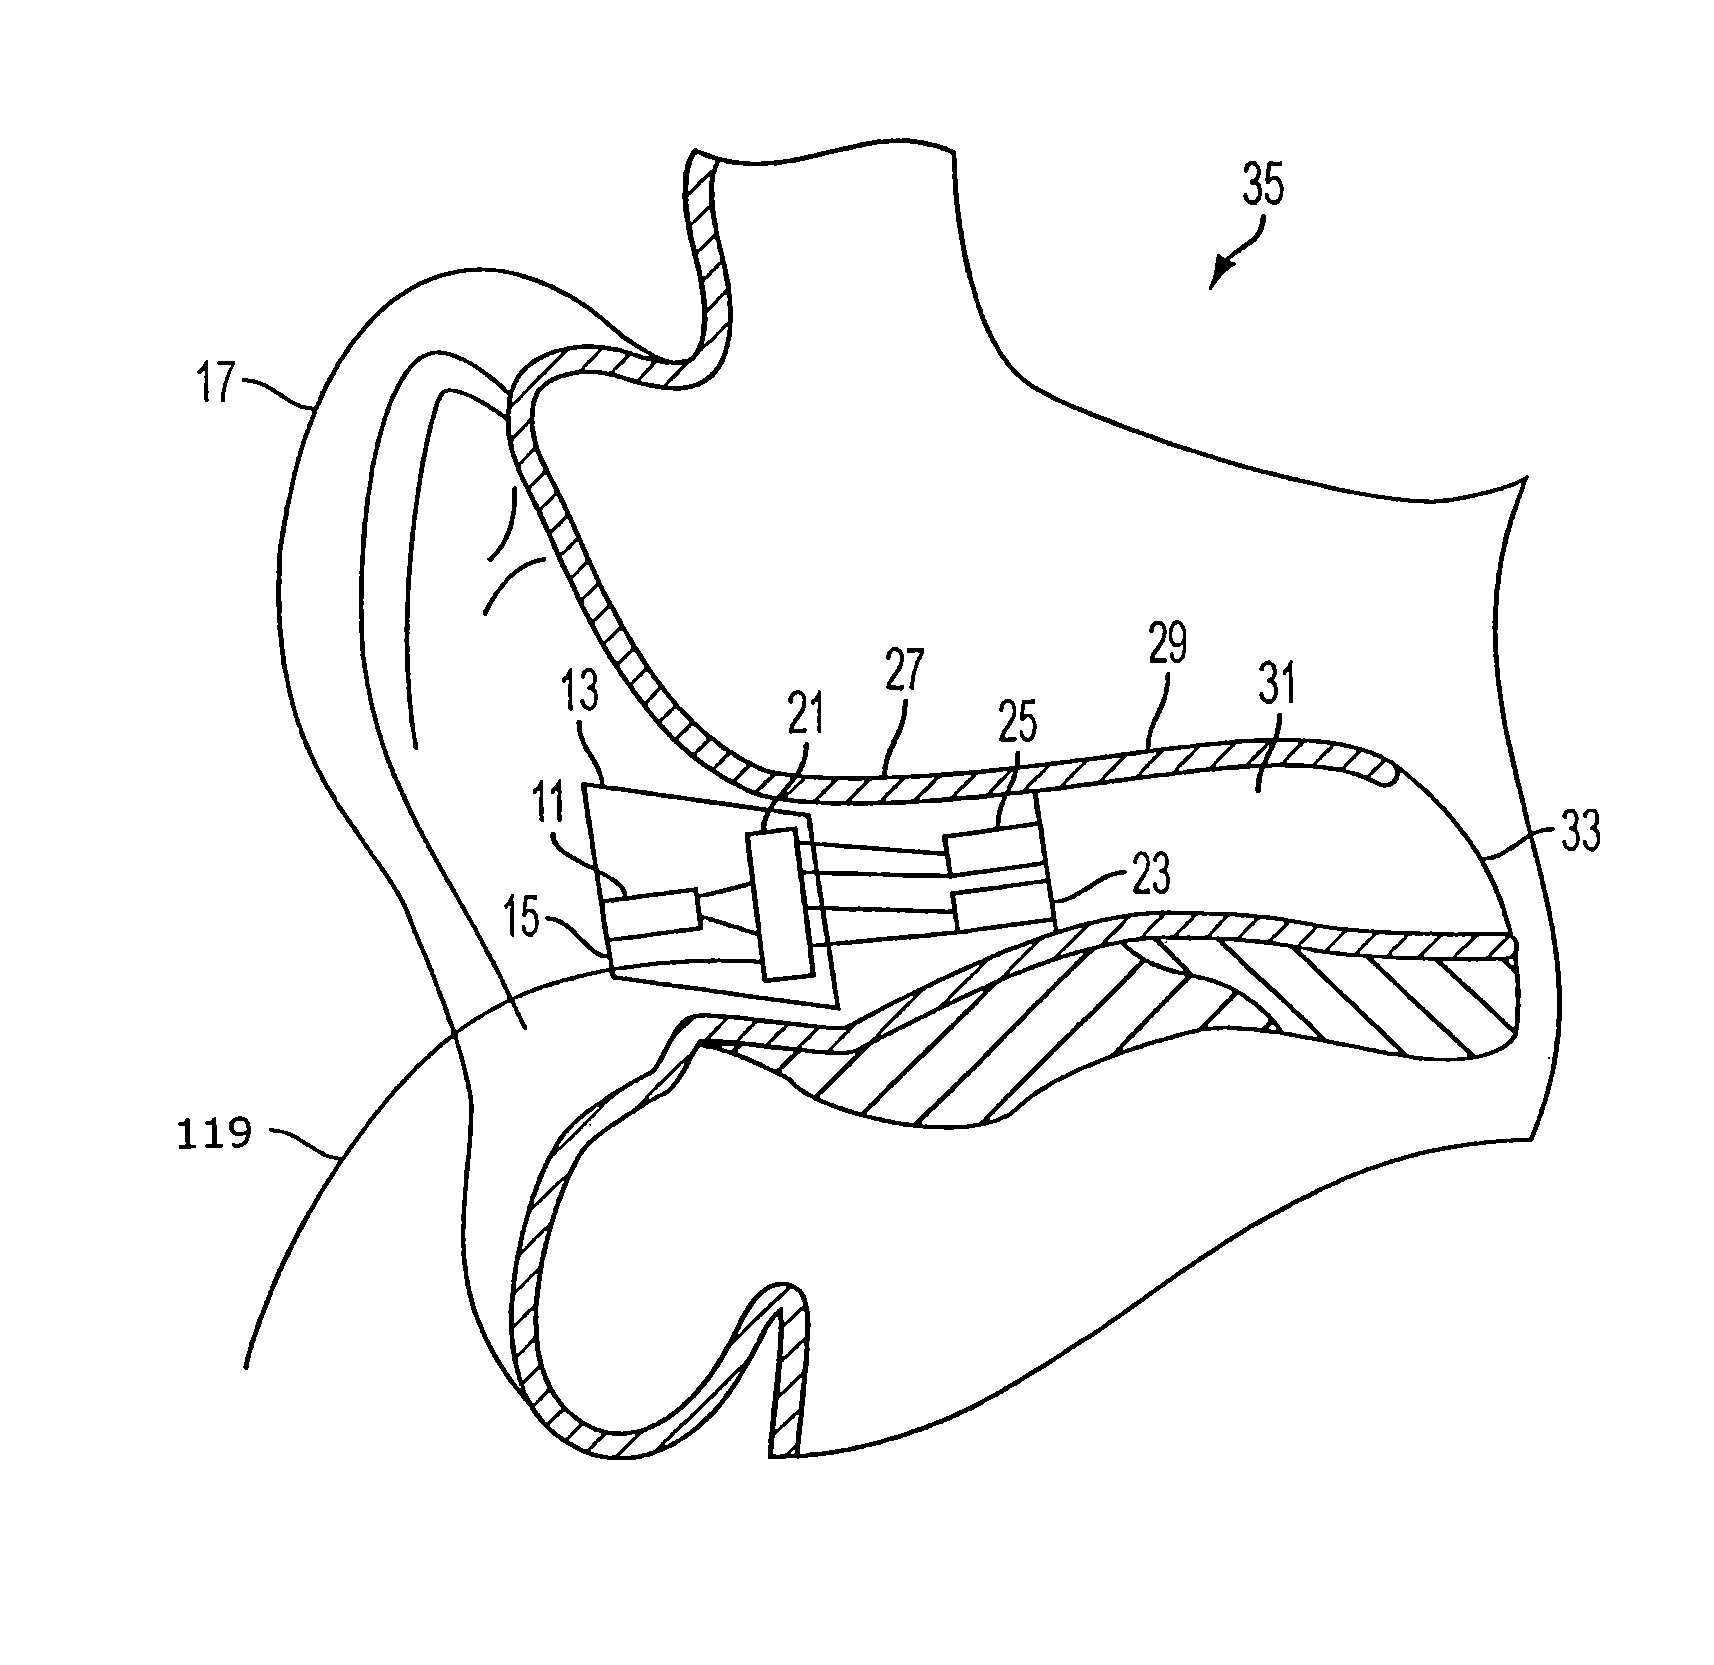 Earhealth monitoring system and method II